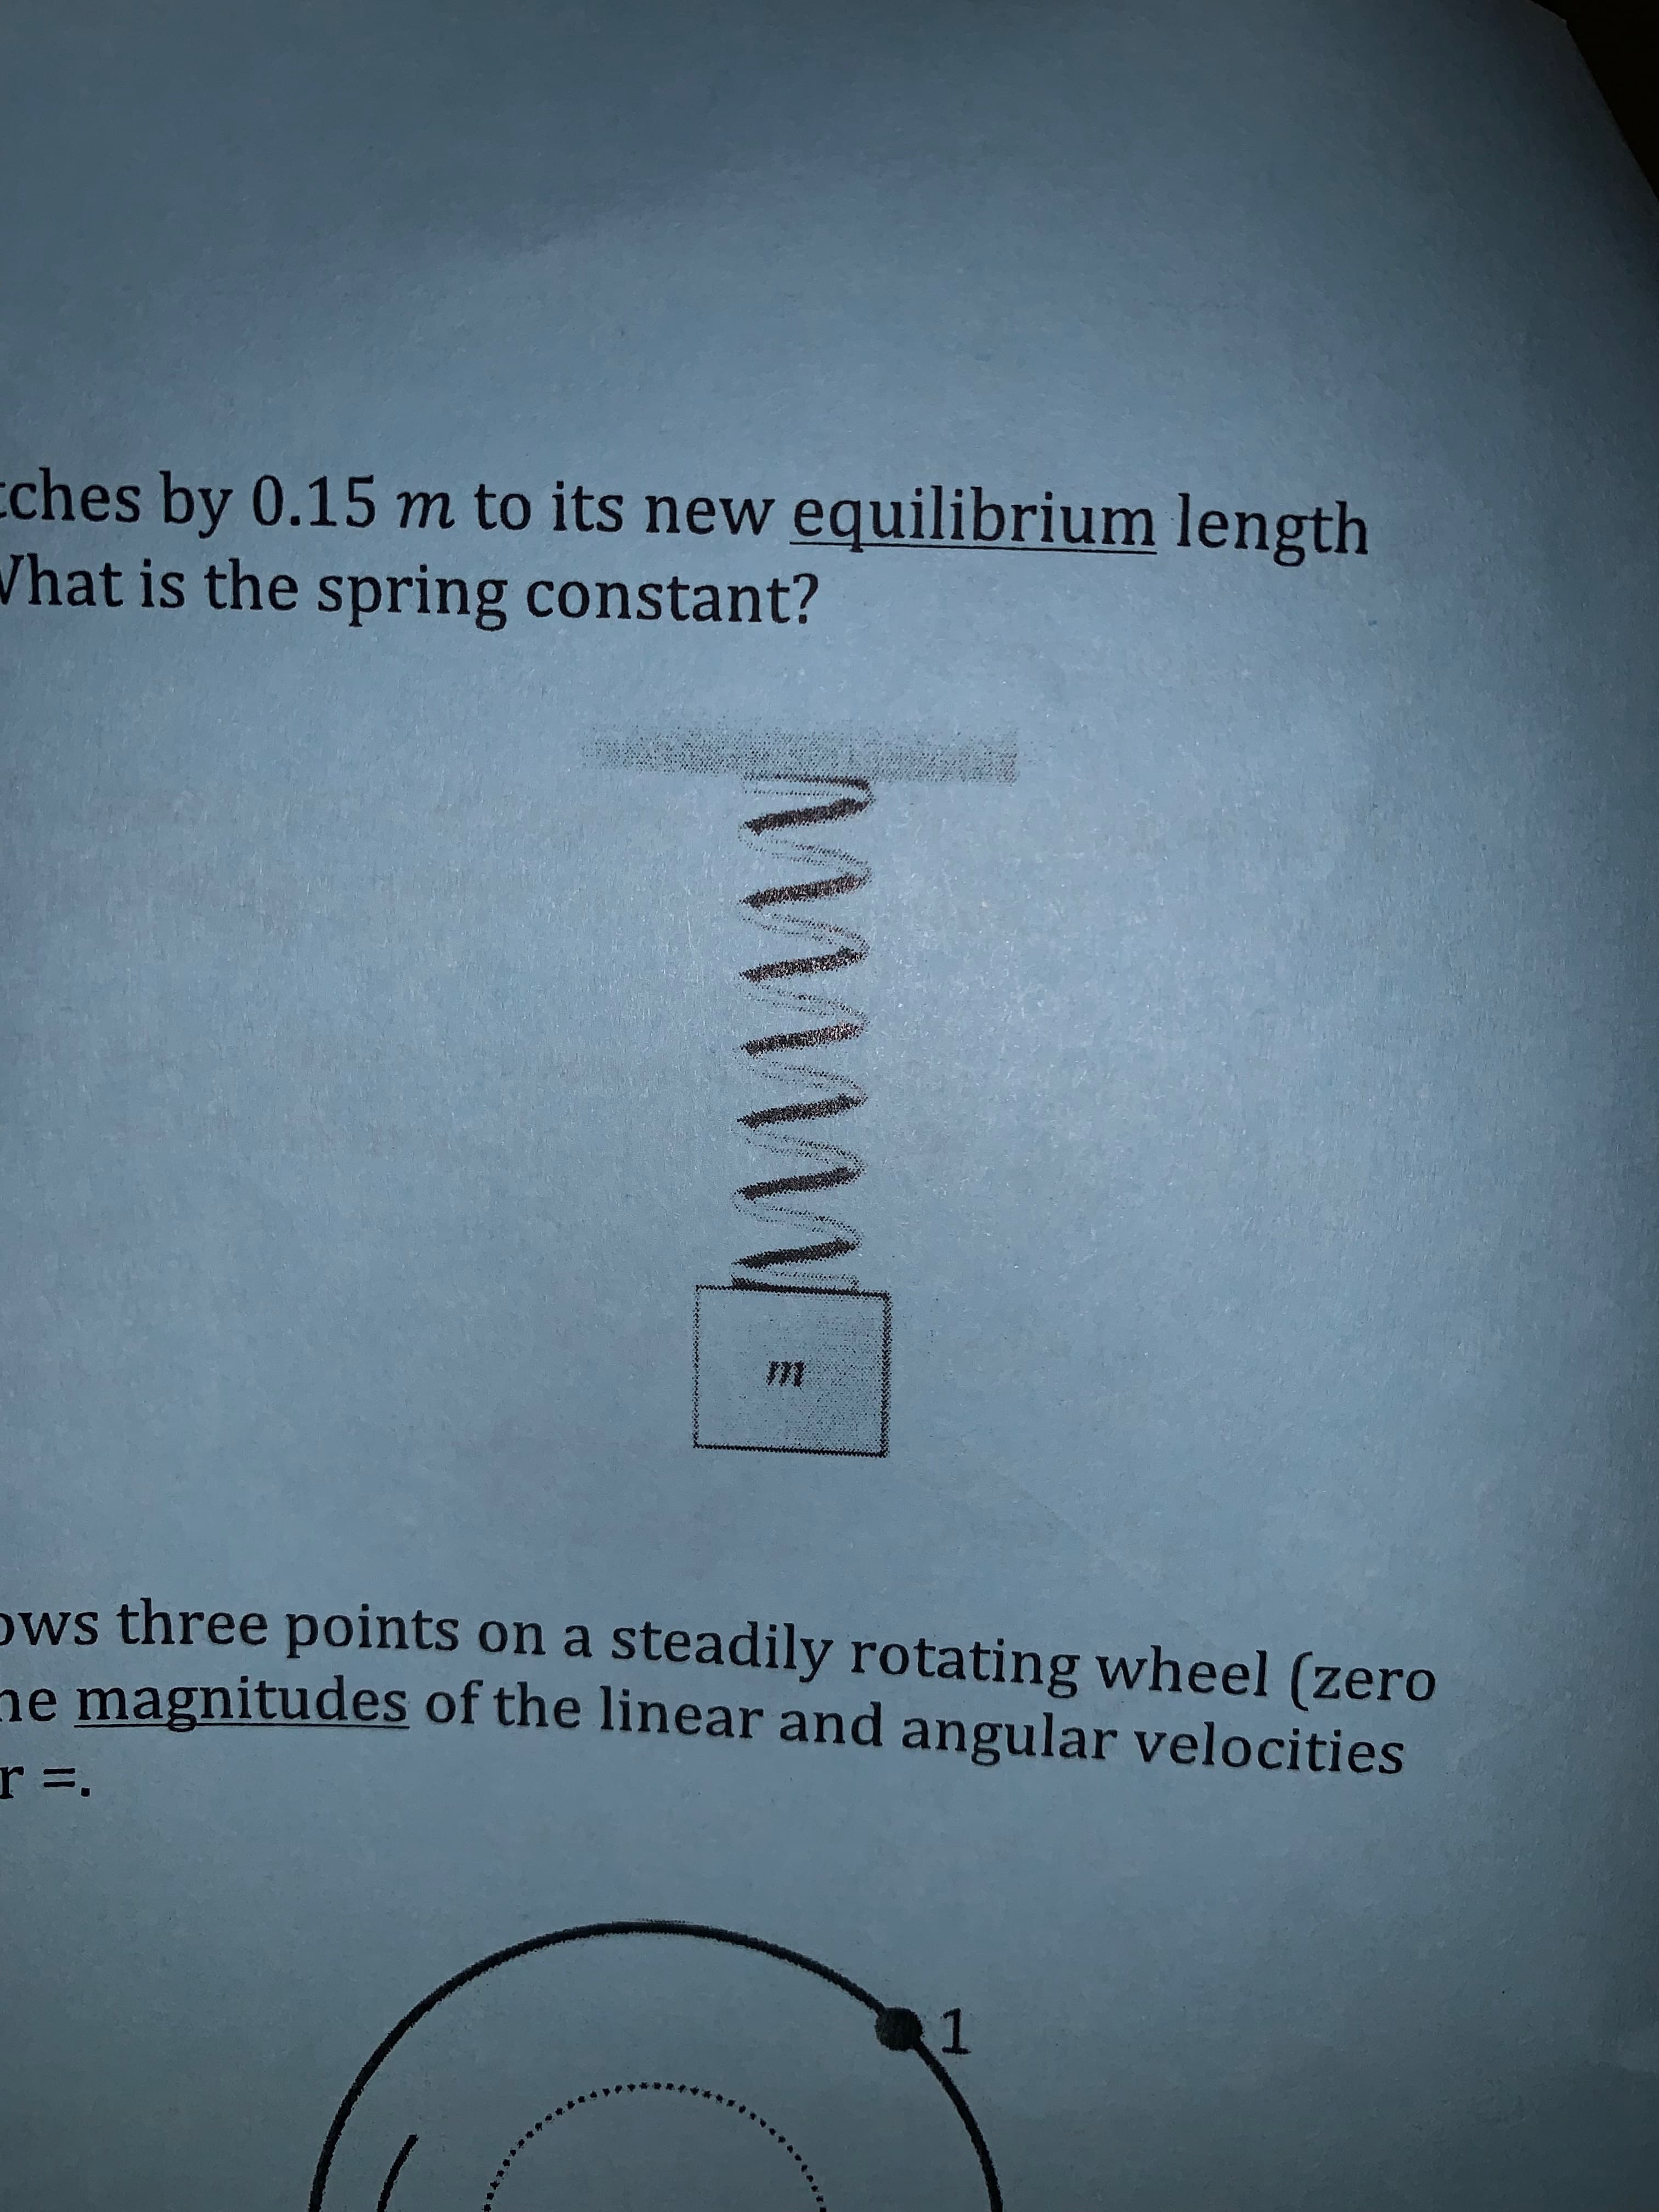 cches by 0.15 m to its new equilibrium length
hat is the spring constant?
m*
ws three points on a steadily rotating wheel (zero
e magnitudes of the linear and angular velocities
r =
1
M
